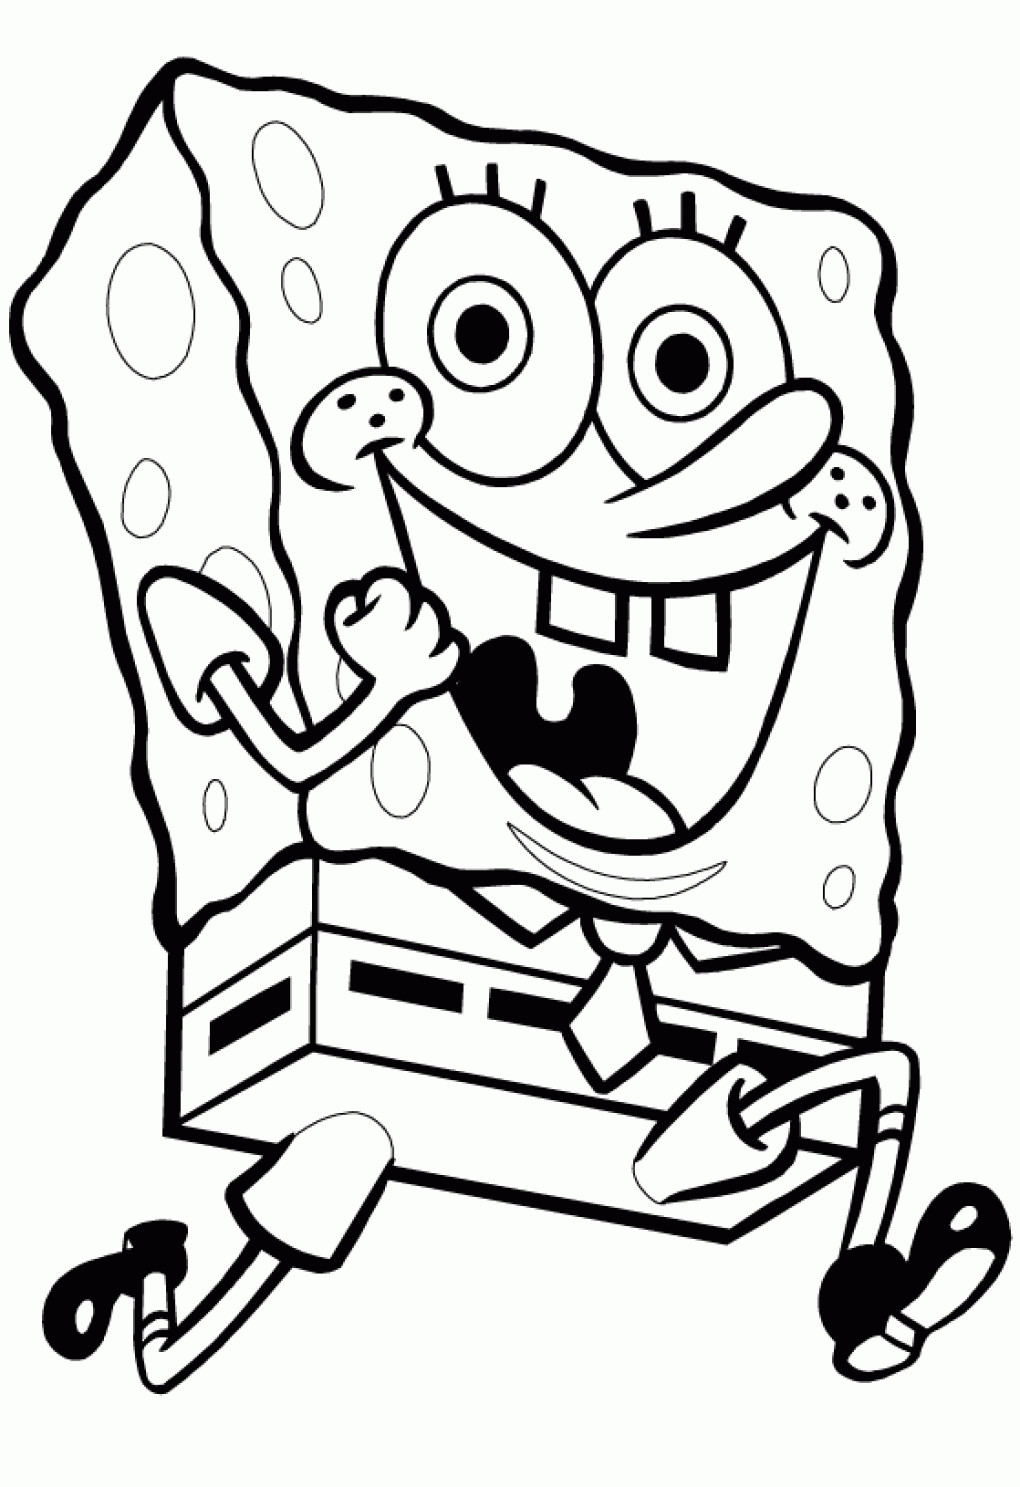 Free Coloring Pages No Printing
 Free Printable Spongebob Squarepants Coloring Pages For Kids